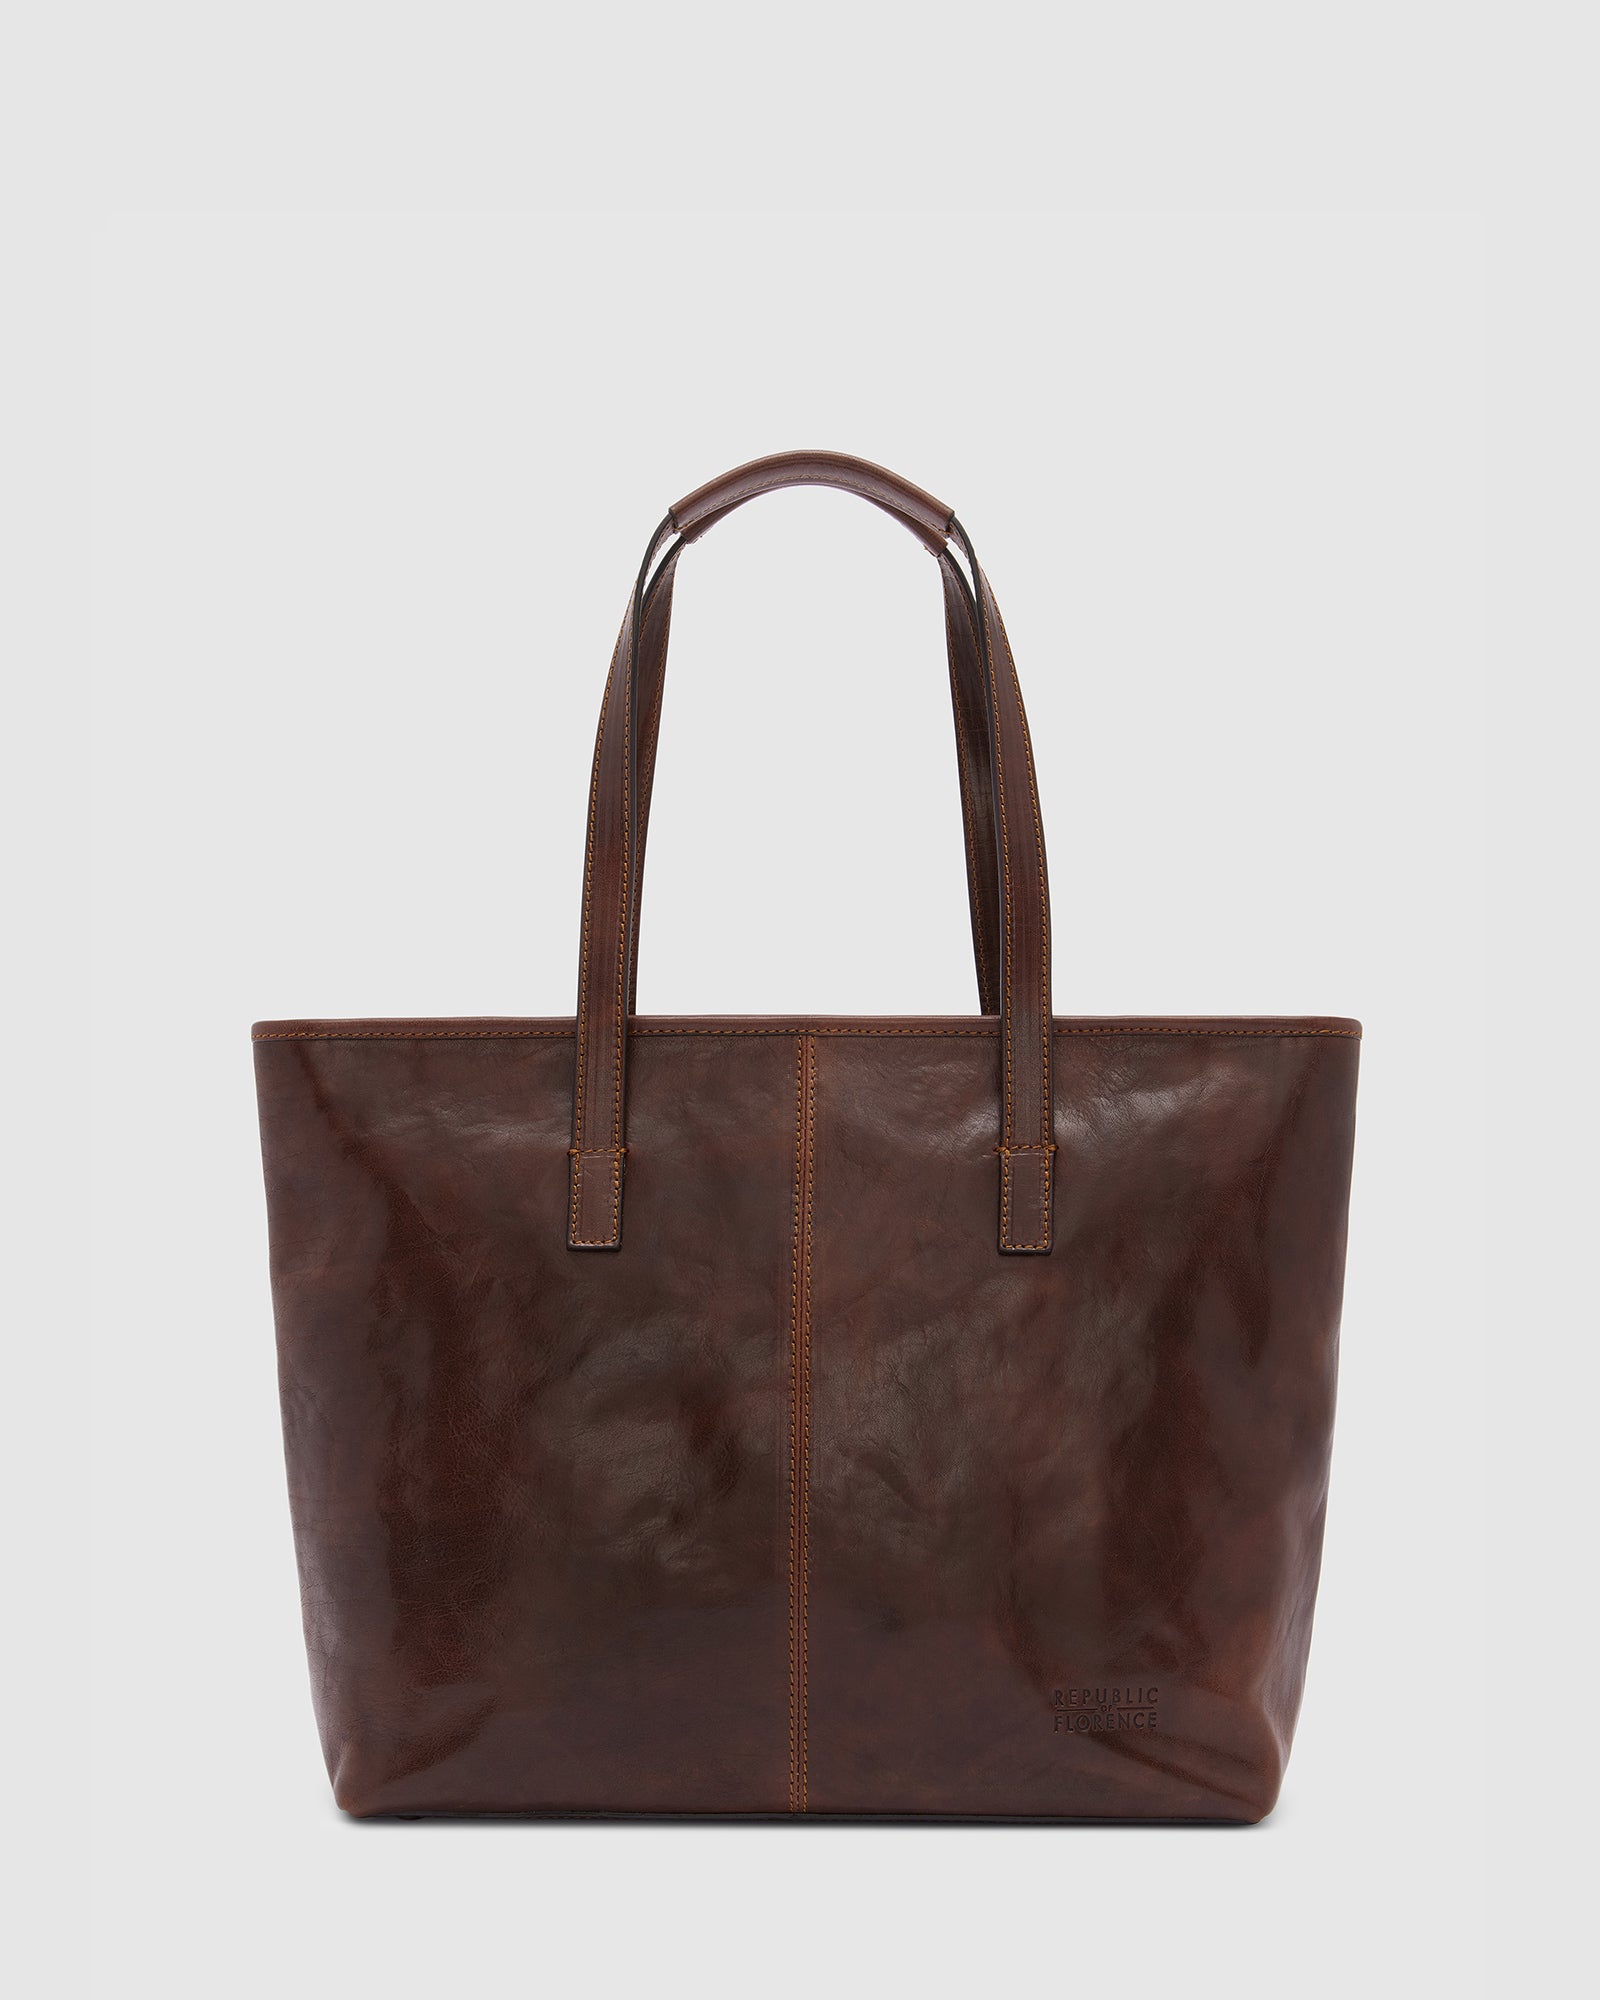 Beatrice Brown - Leather Tote / Work Bag